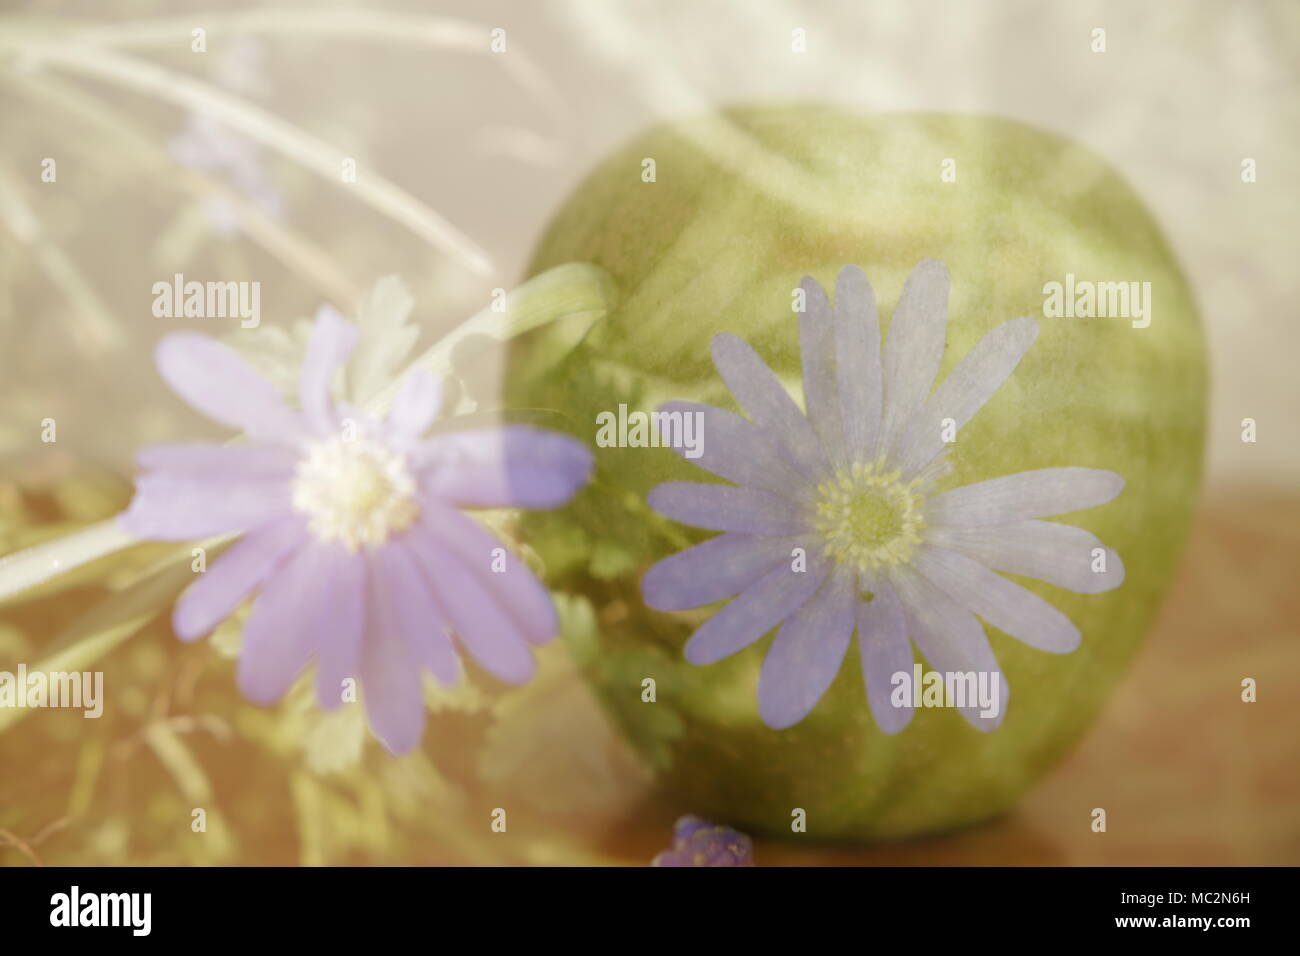 an anemone in an apple in double exposure Stock Photo